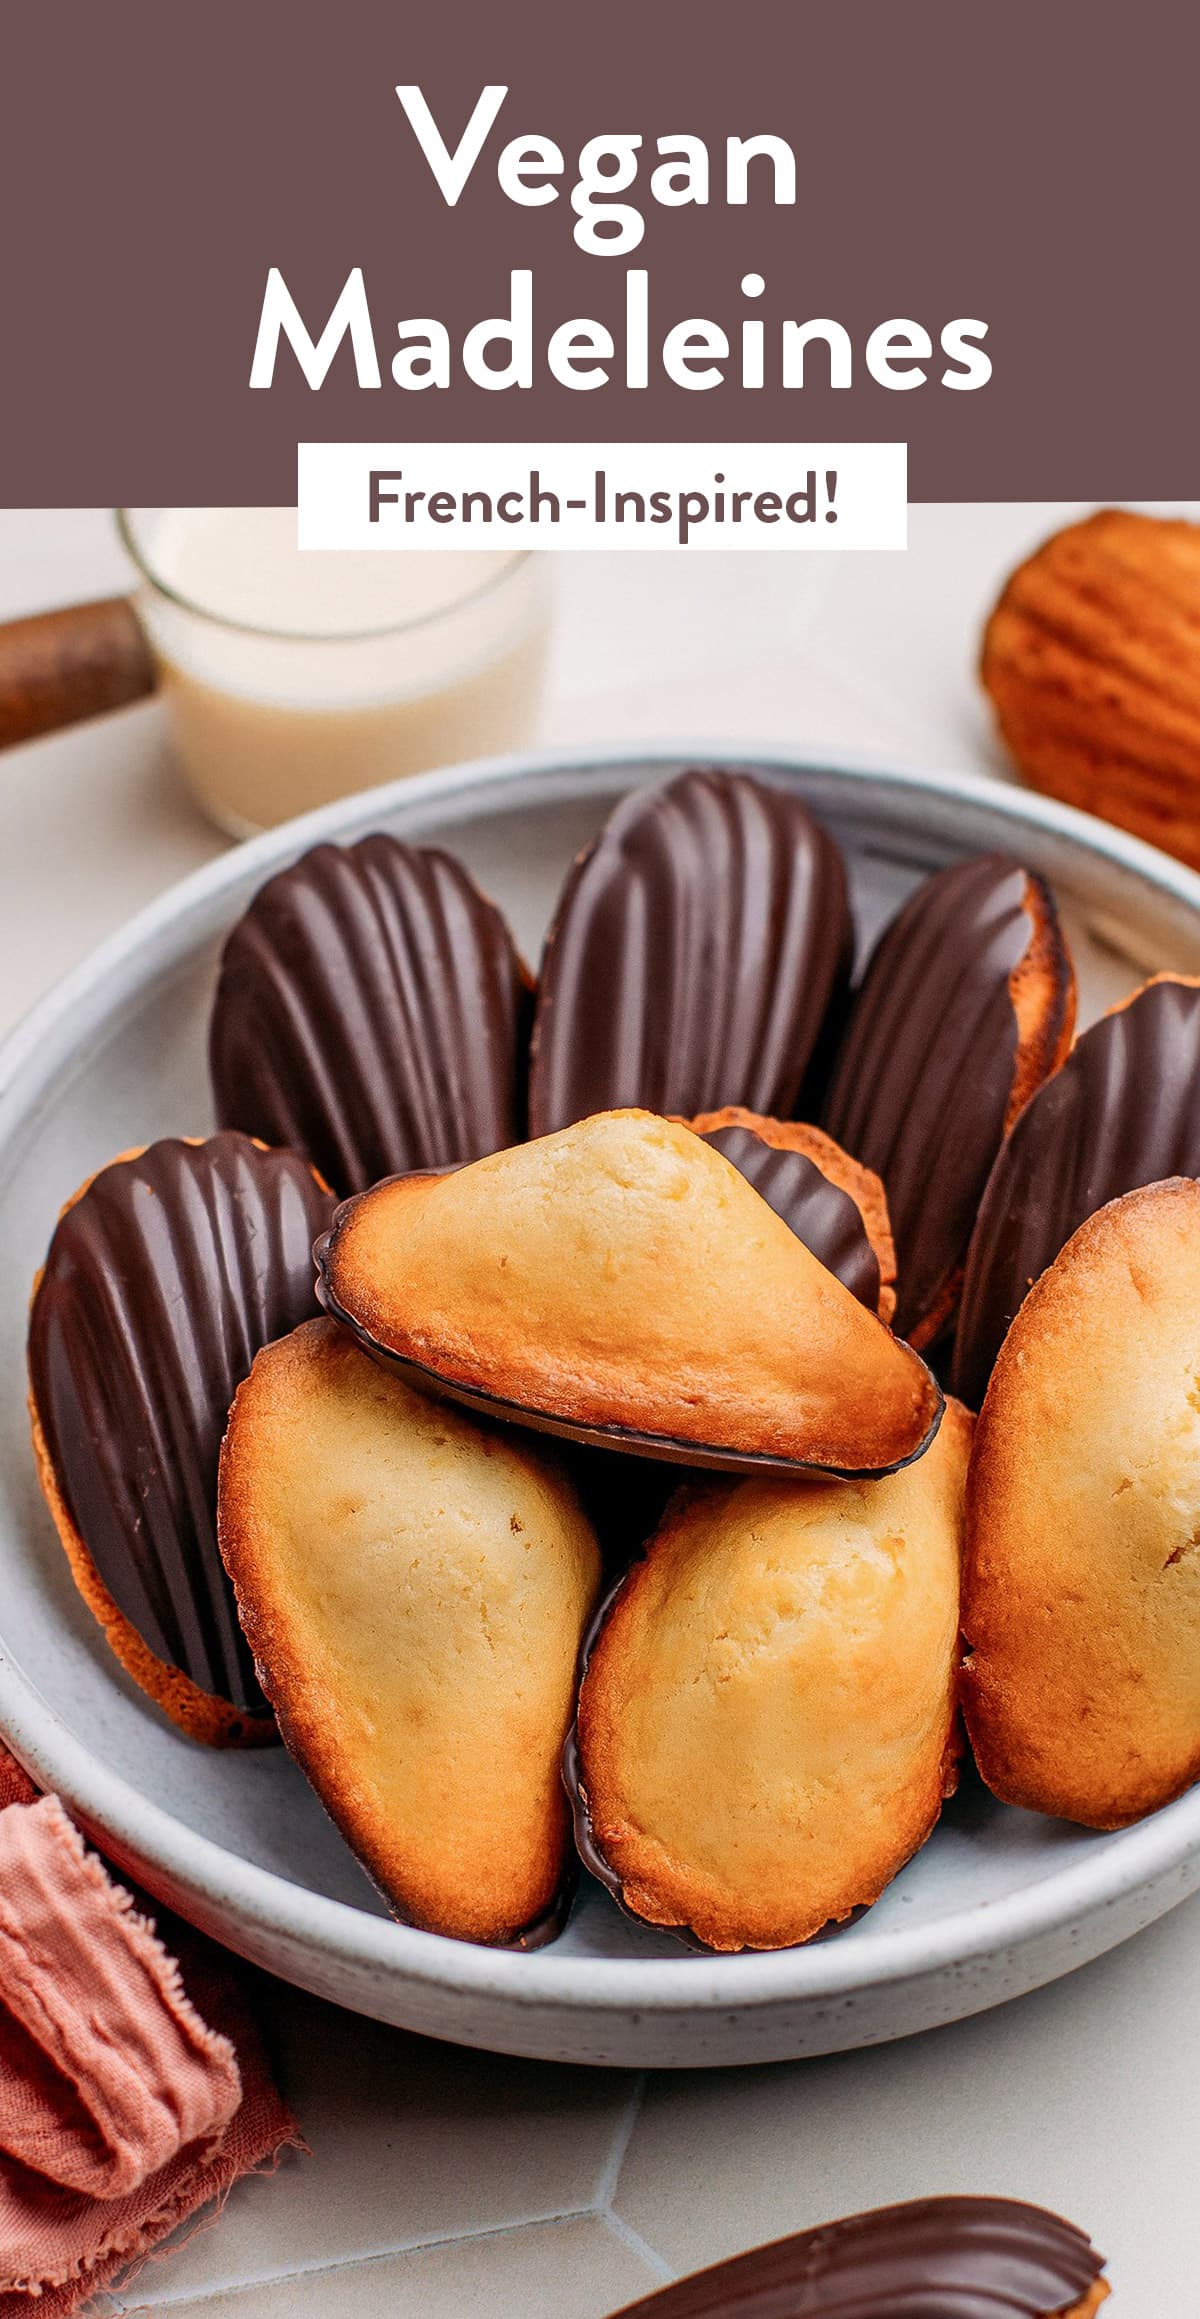 Learn how to make French-inspired vegan madeleines that are buttery, tender, and simply irresistible! These madeleines are baked to a perfect golden brown and can be dipped in dark chocolate to make them even more decadent. Just 8 ingredients and 1 bowl are required! #madeleines #vegan